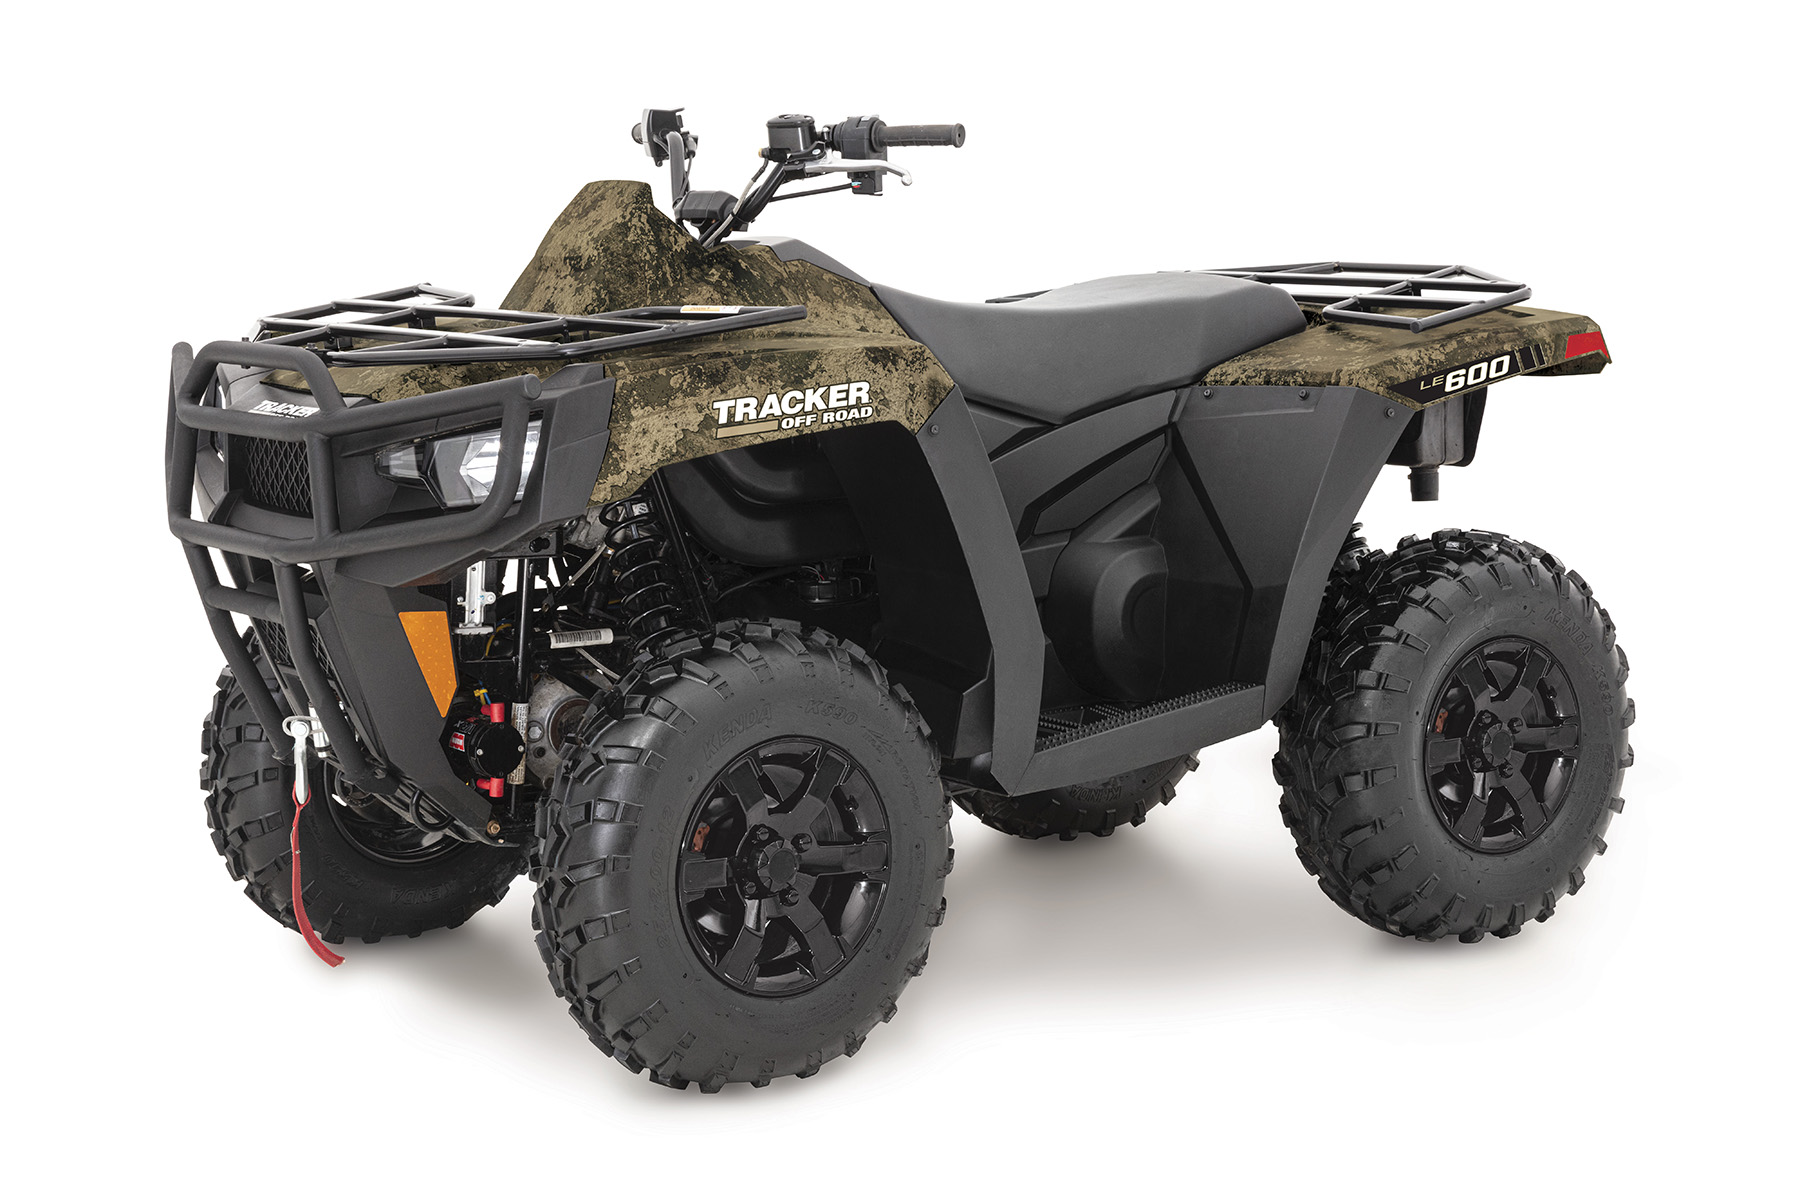 TRACKER Off Road Vehicles - Shop all ATVs and Side by Side UTVs for Sale